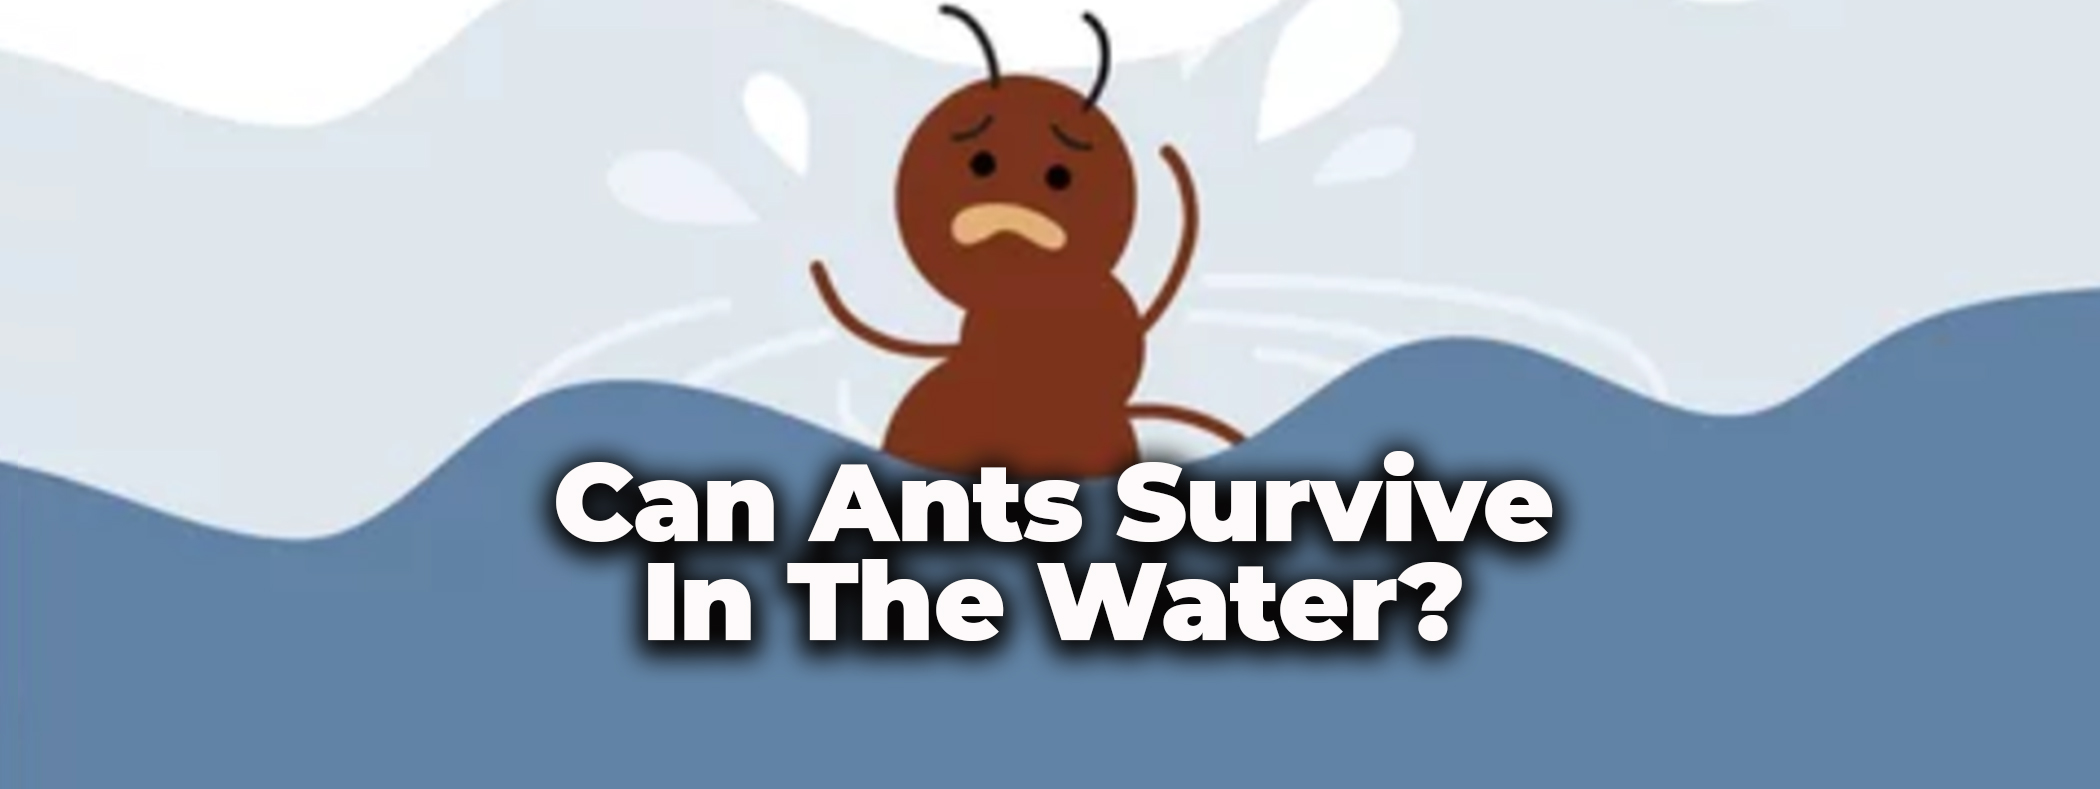 Can Ants Survive In The Water